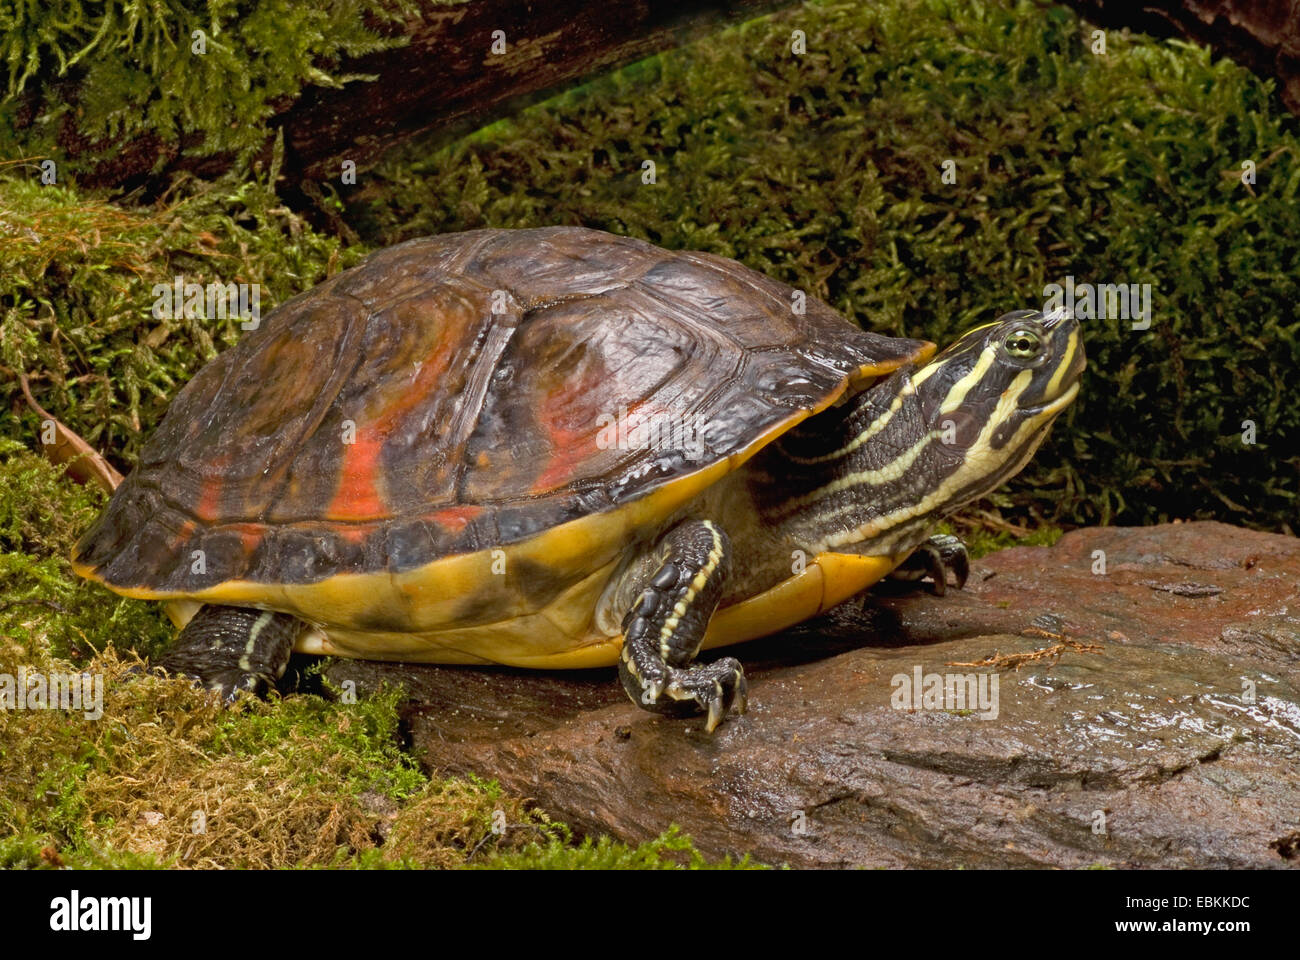 Florida redbelly turtle, Florida red-bellied turtle (Pseudemys rubriventris nelsoni, Chrysemys nelsoni, Pseudemys nelsoni), on a mossy stone Stock Photo